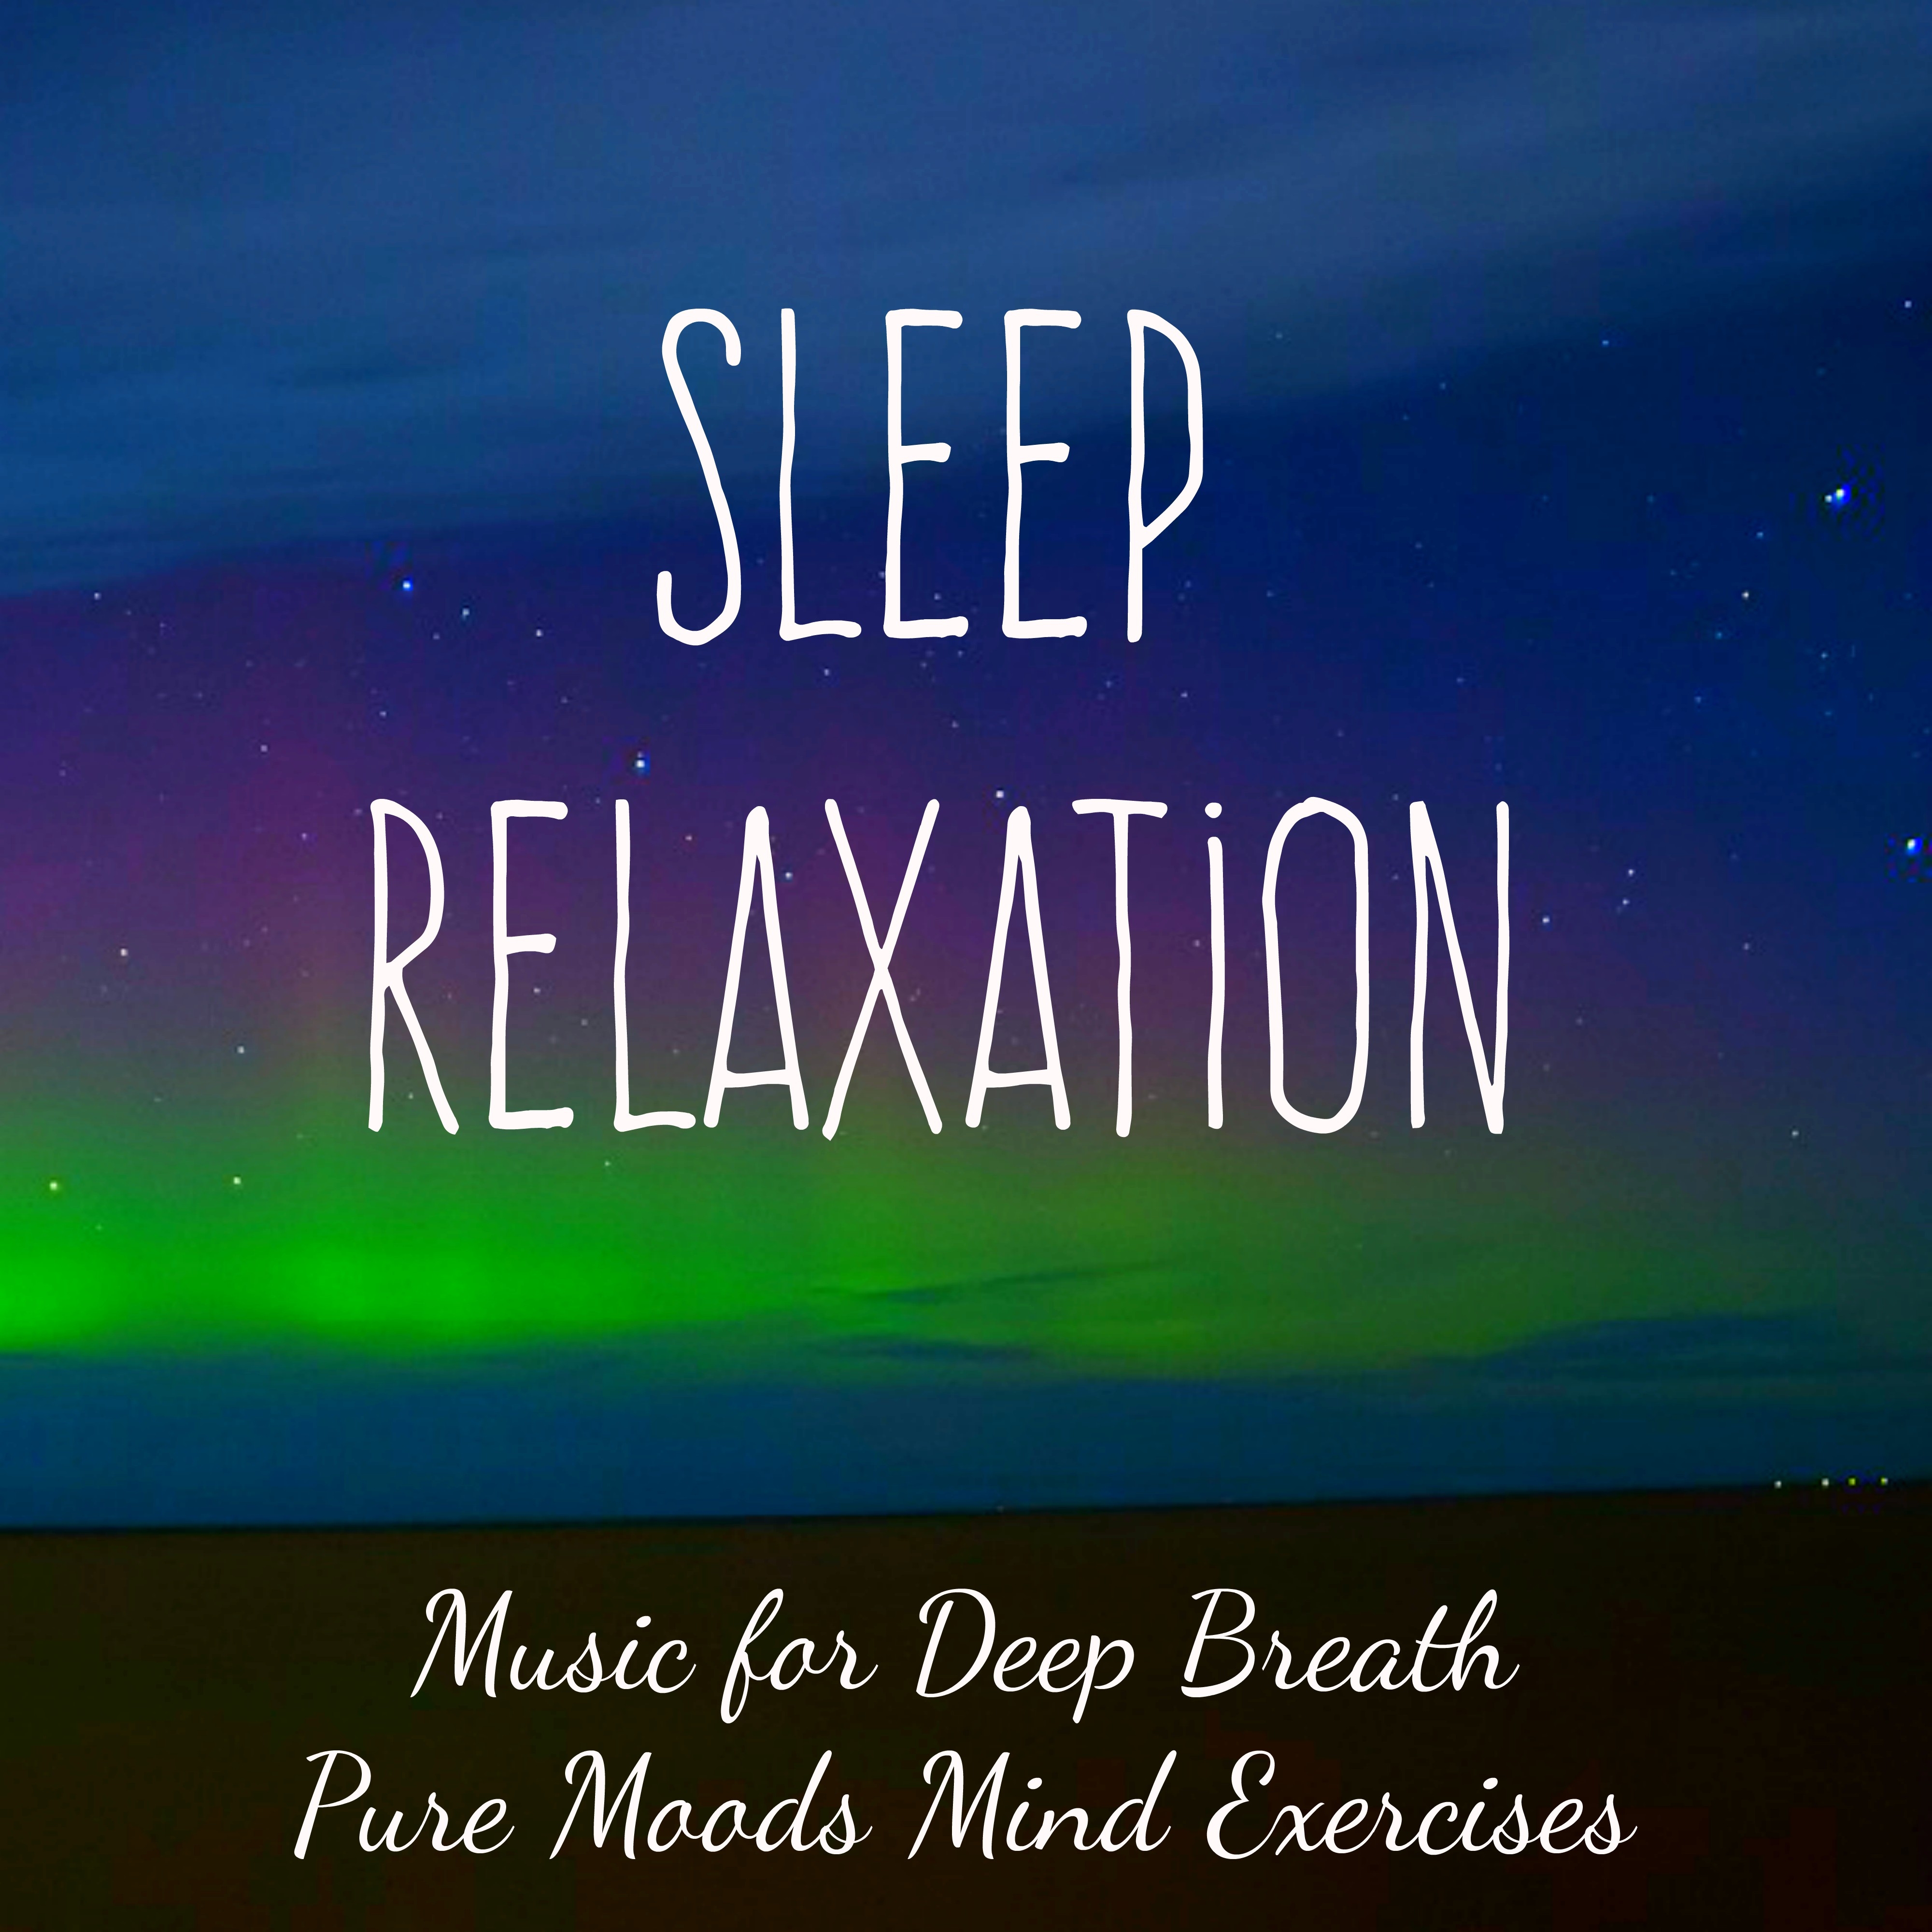 Sleep Relaxation - Yoga Relaxing Instrumental Music for Deep Breath Pure Moods Mind Exercises with New Age Nature Soft Sounds